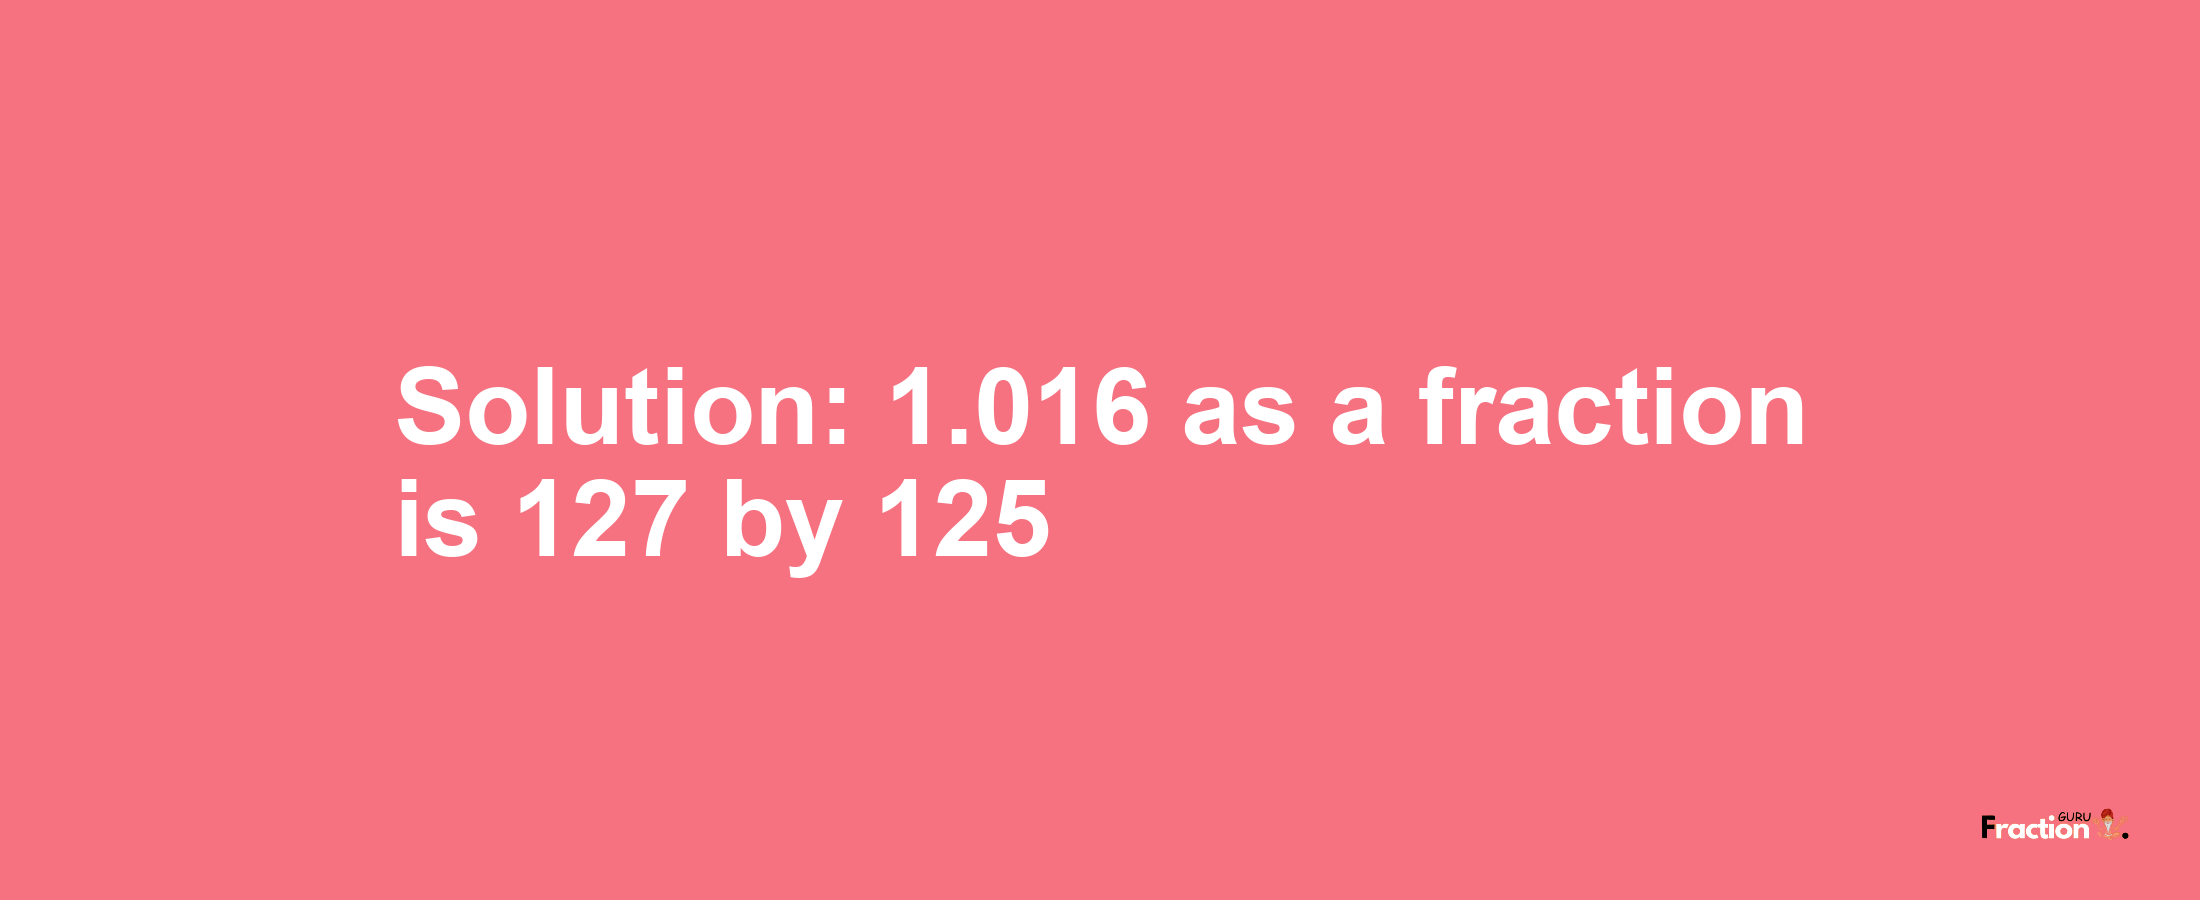 Solution:1.016 as a fraction is 127/125